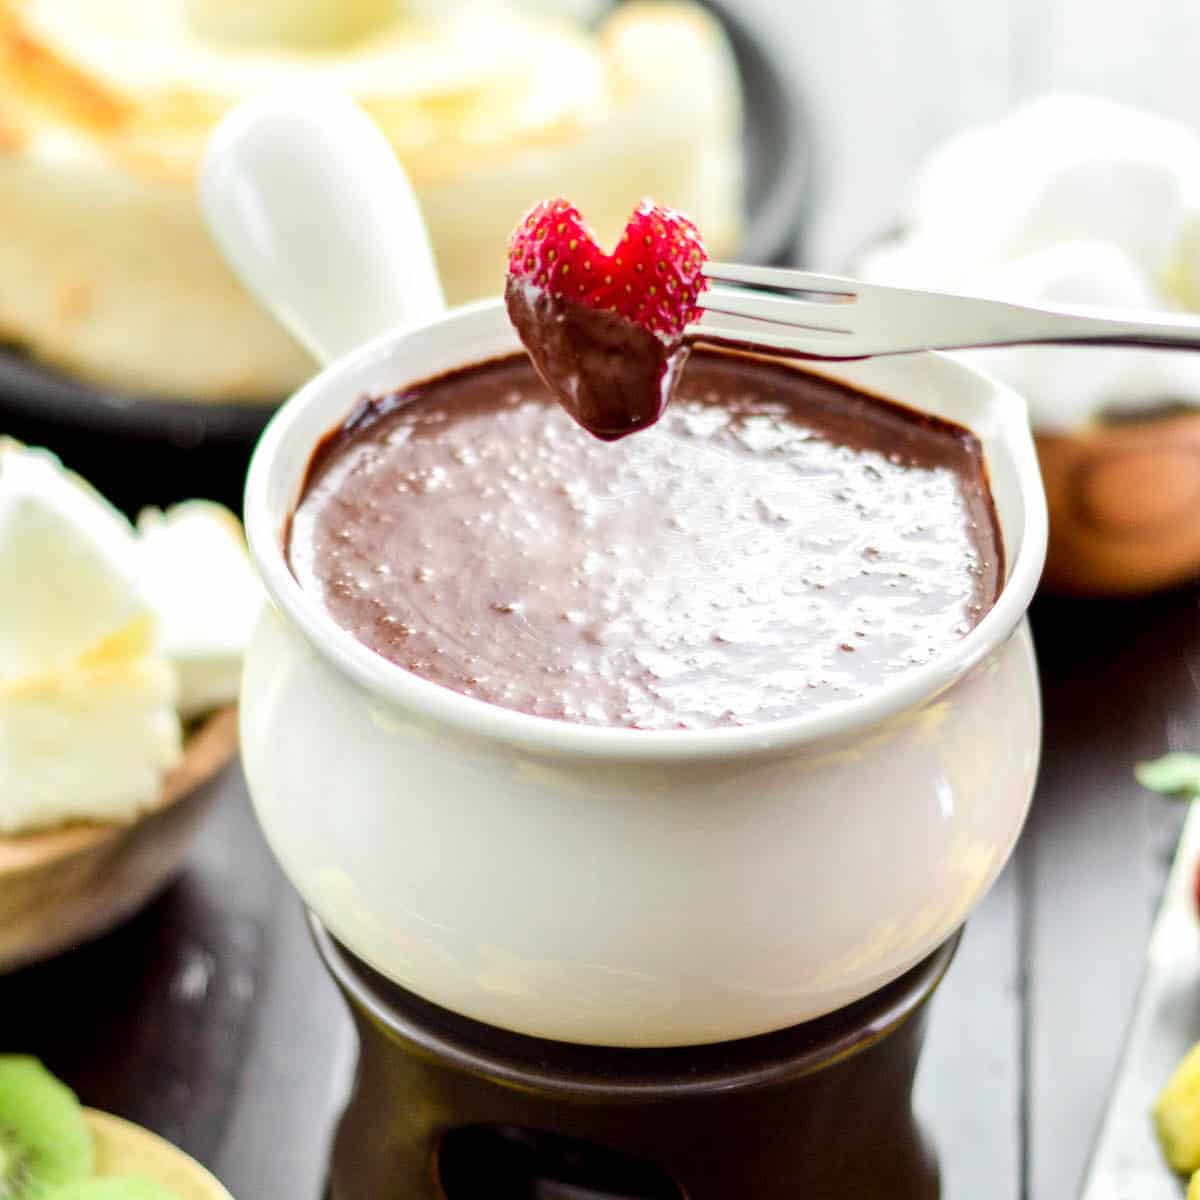 Front view of a heart-shaped strawberry that has been dipped into Vegan Chocolate Fondue